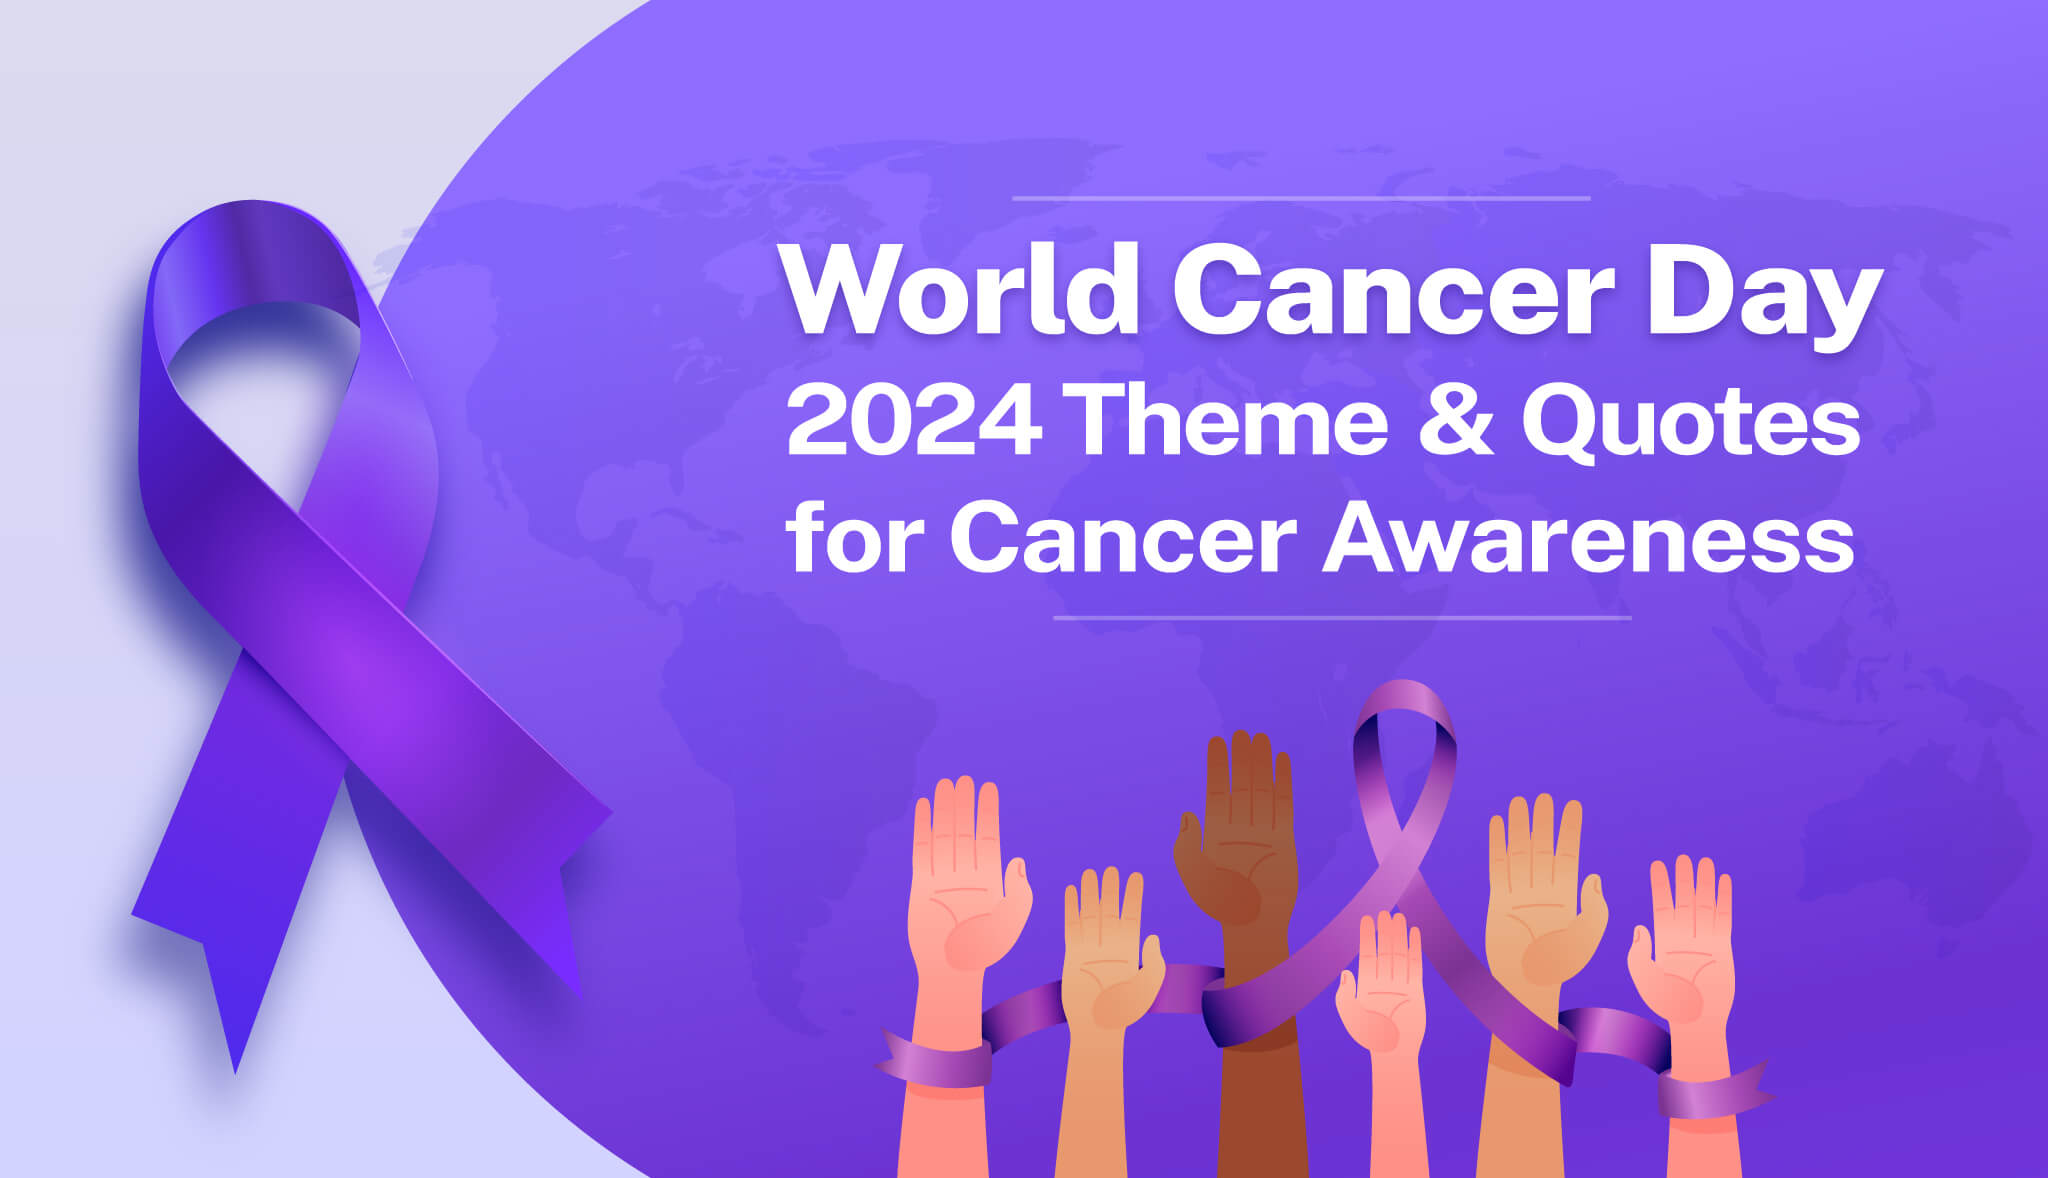 World Cancer Day 2024 Theme And Quotes - Postive